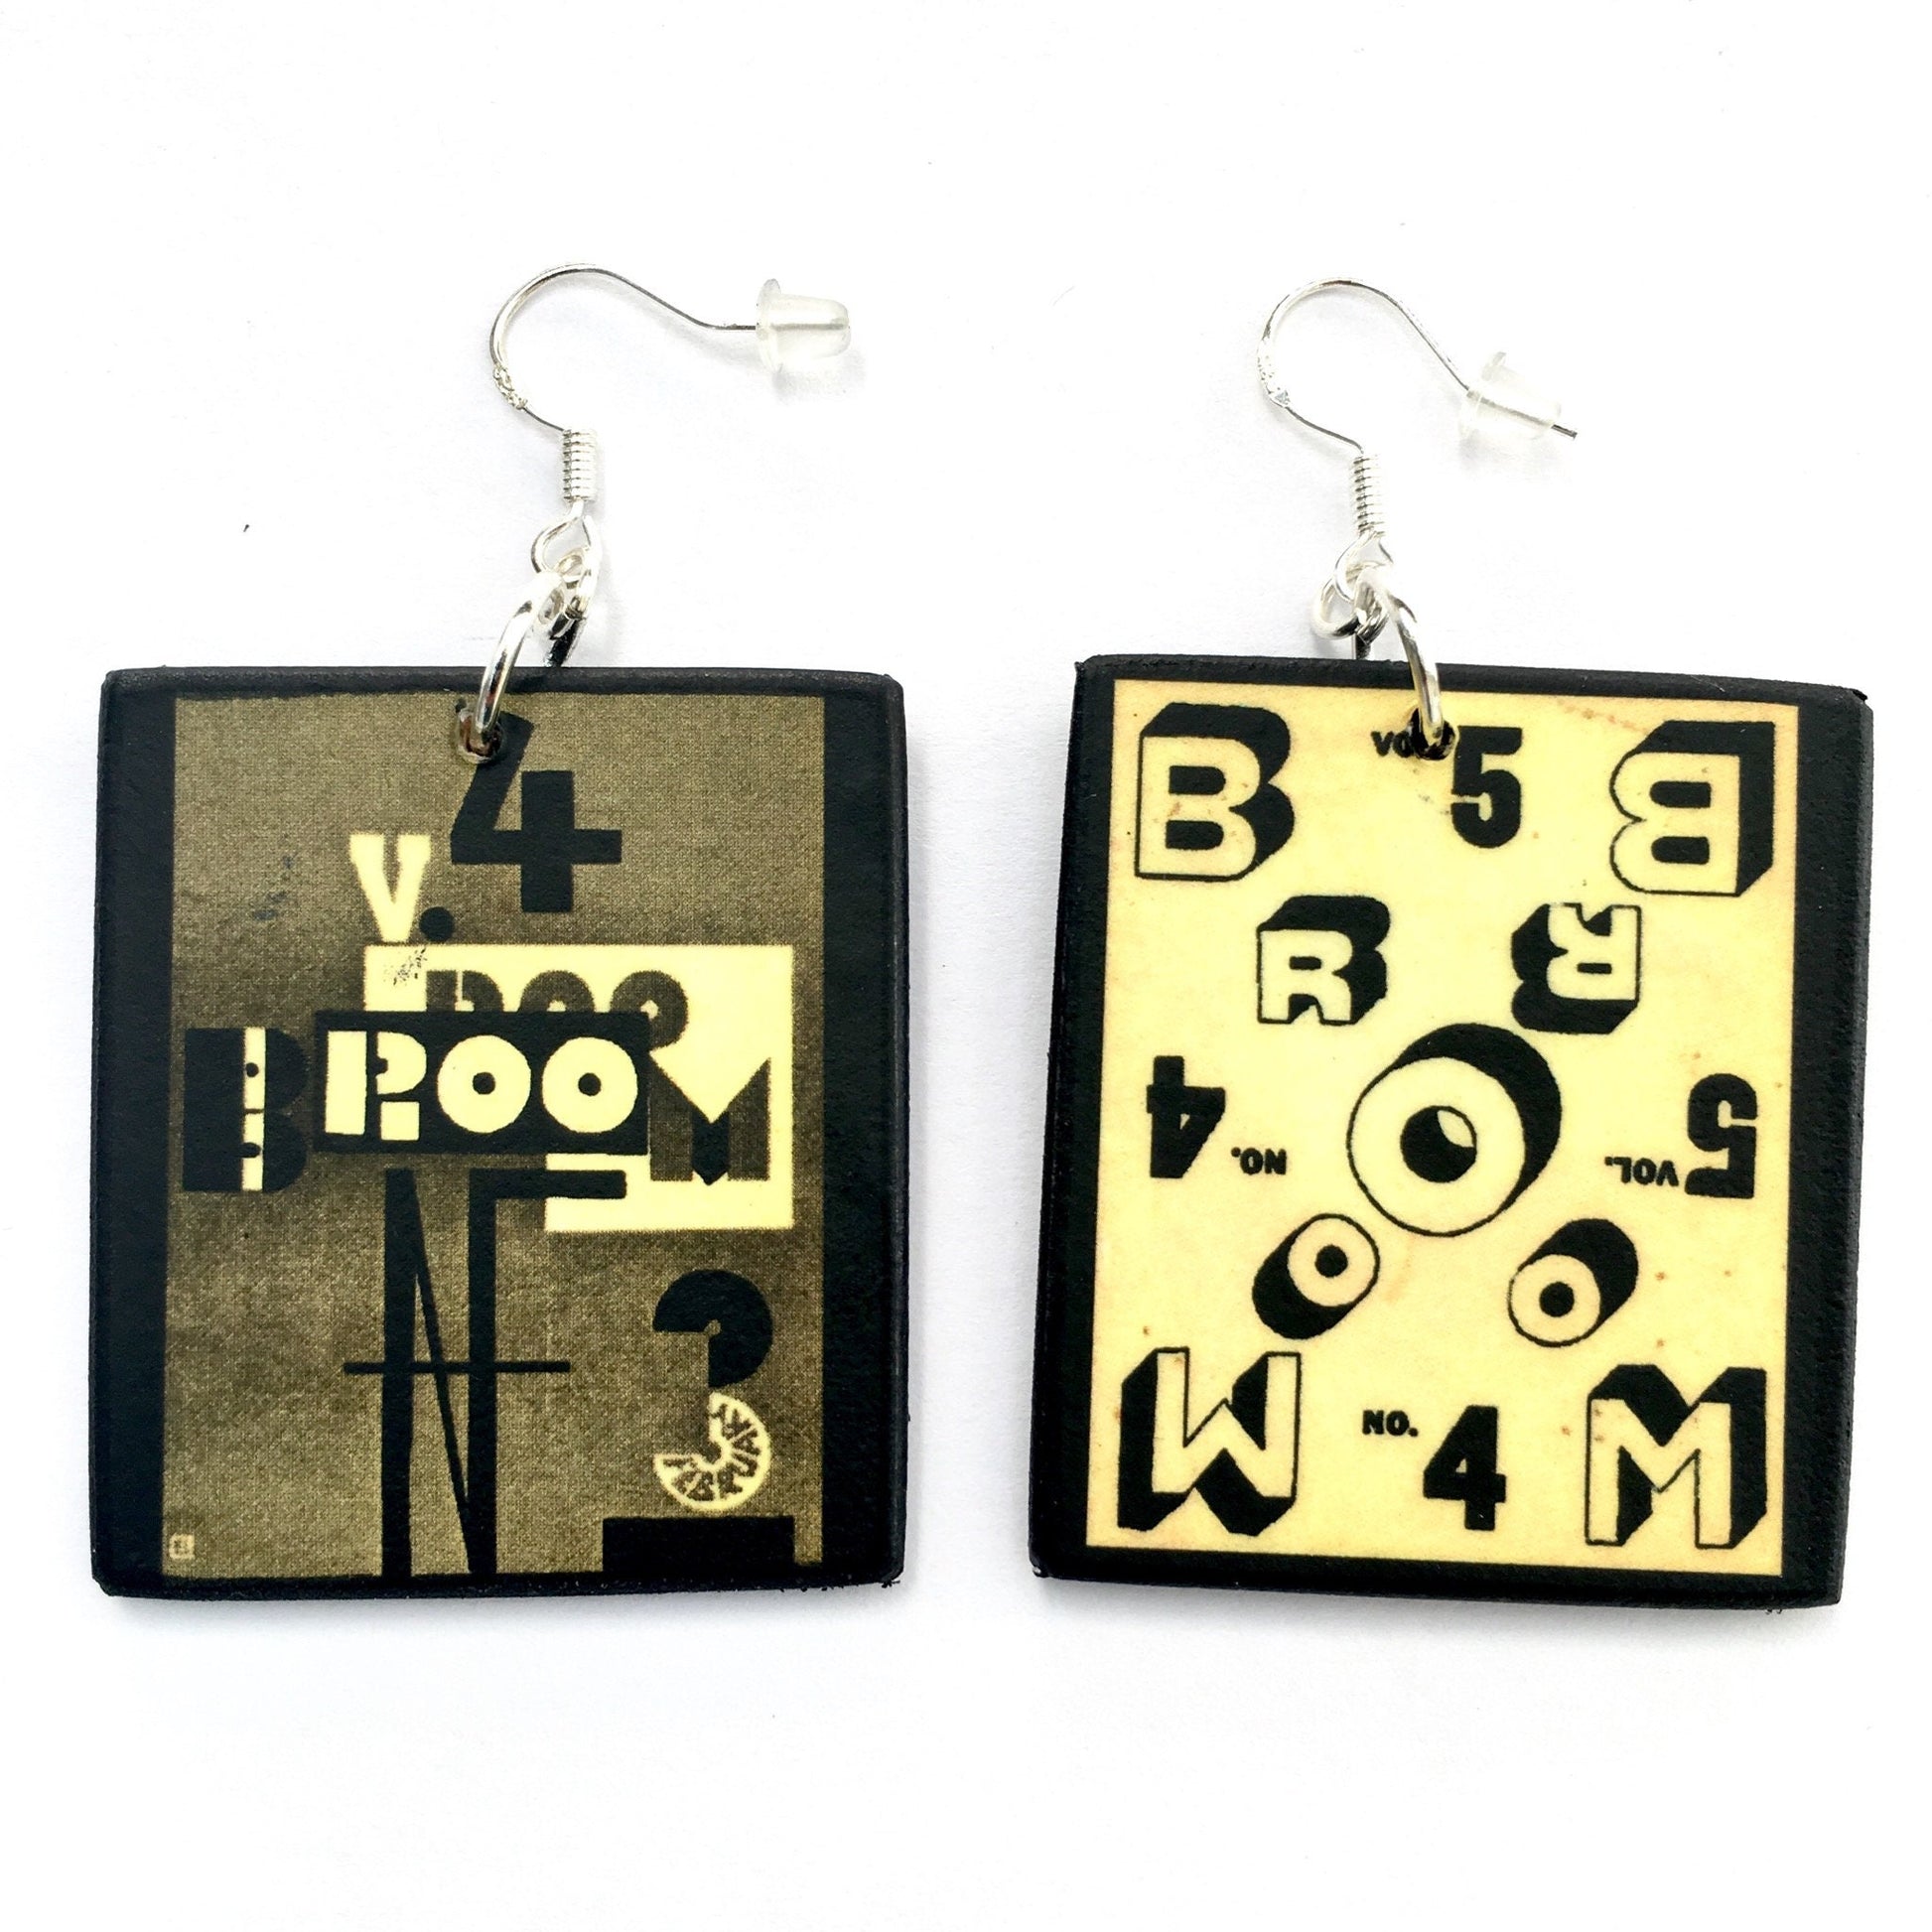 Mismatched Broom art magazine, abstract, handmade drop earrings on sustainable wood Inspired by Constructivist art cover magazine cover painting by the artist El Lissinsky.